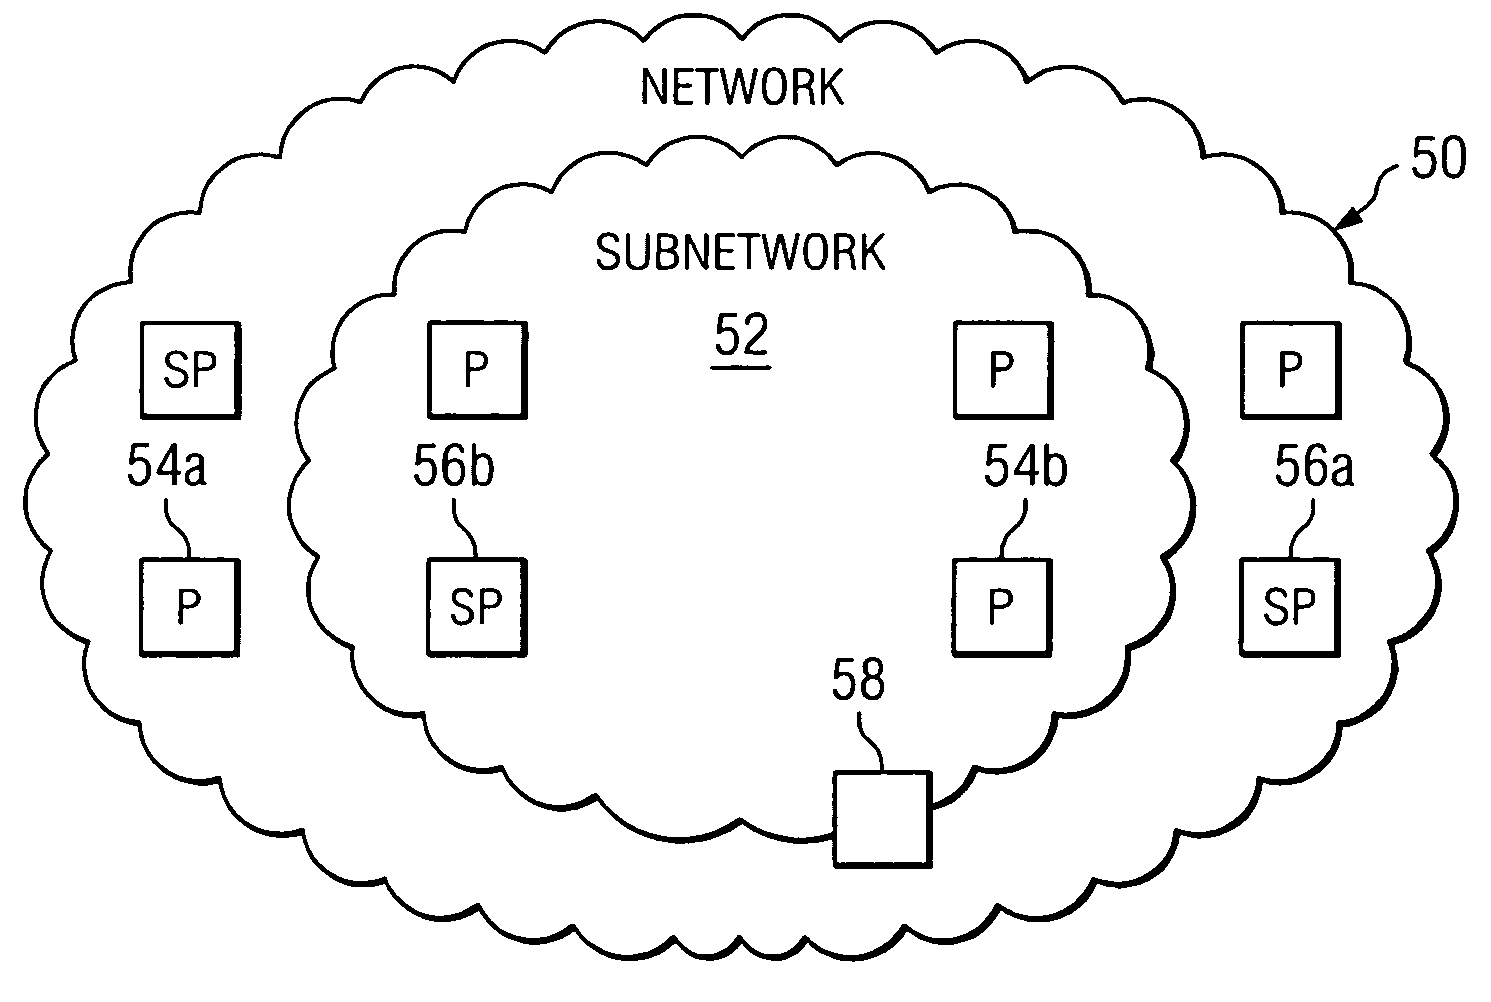 Estimating and managing network traffic